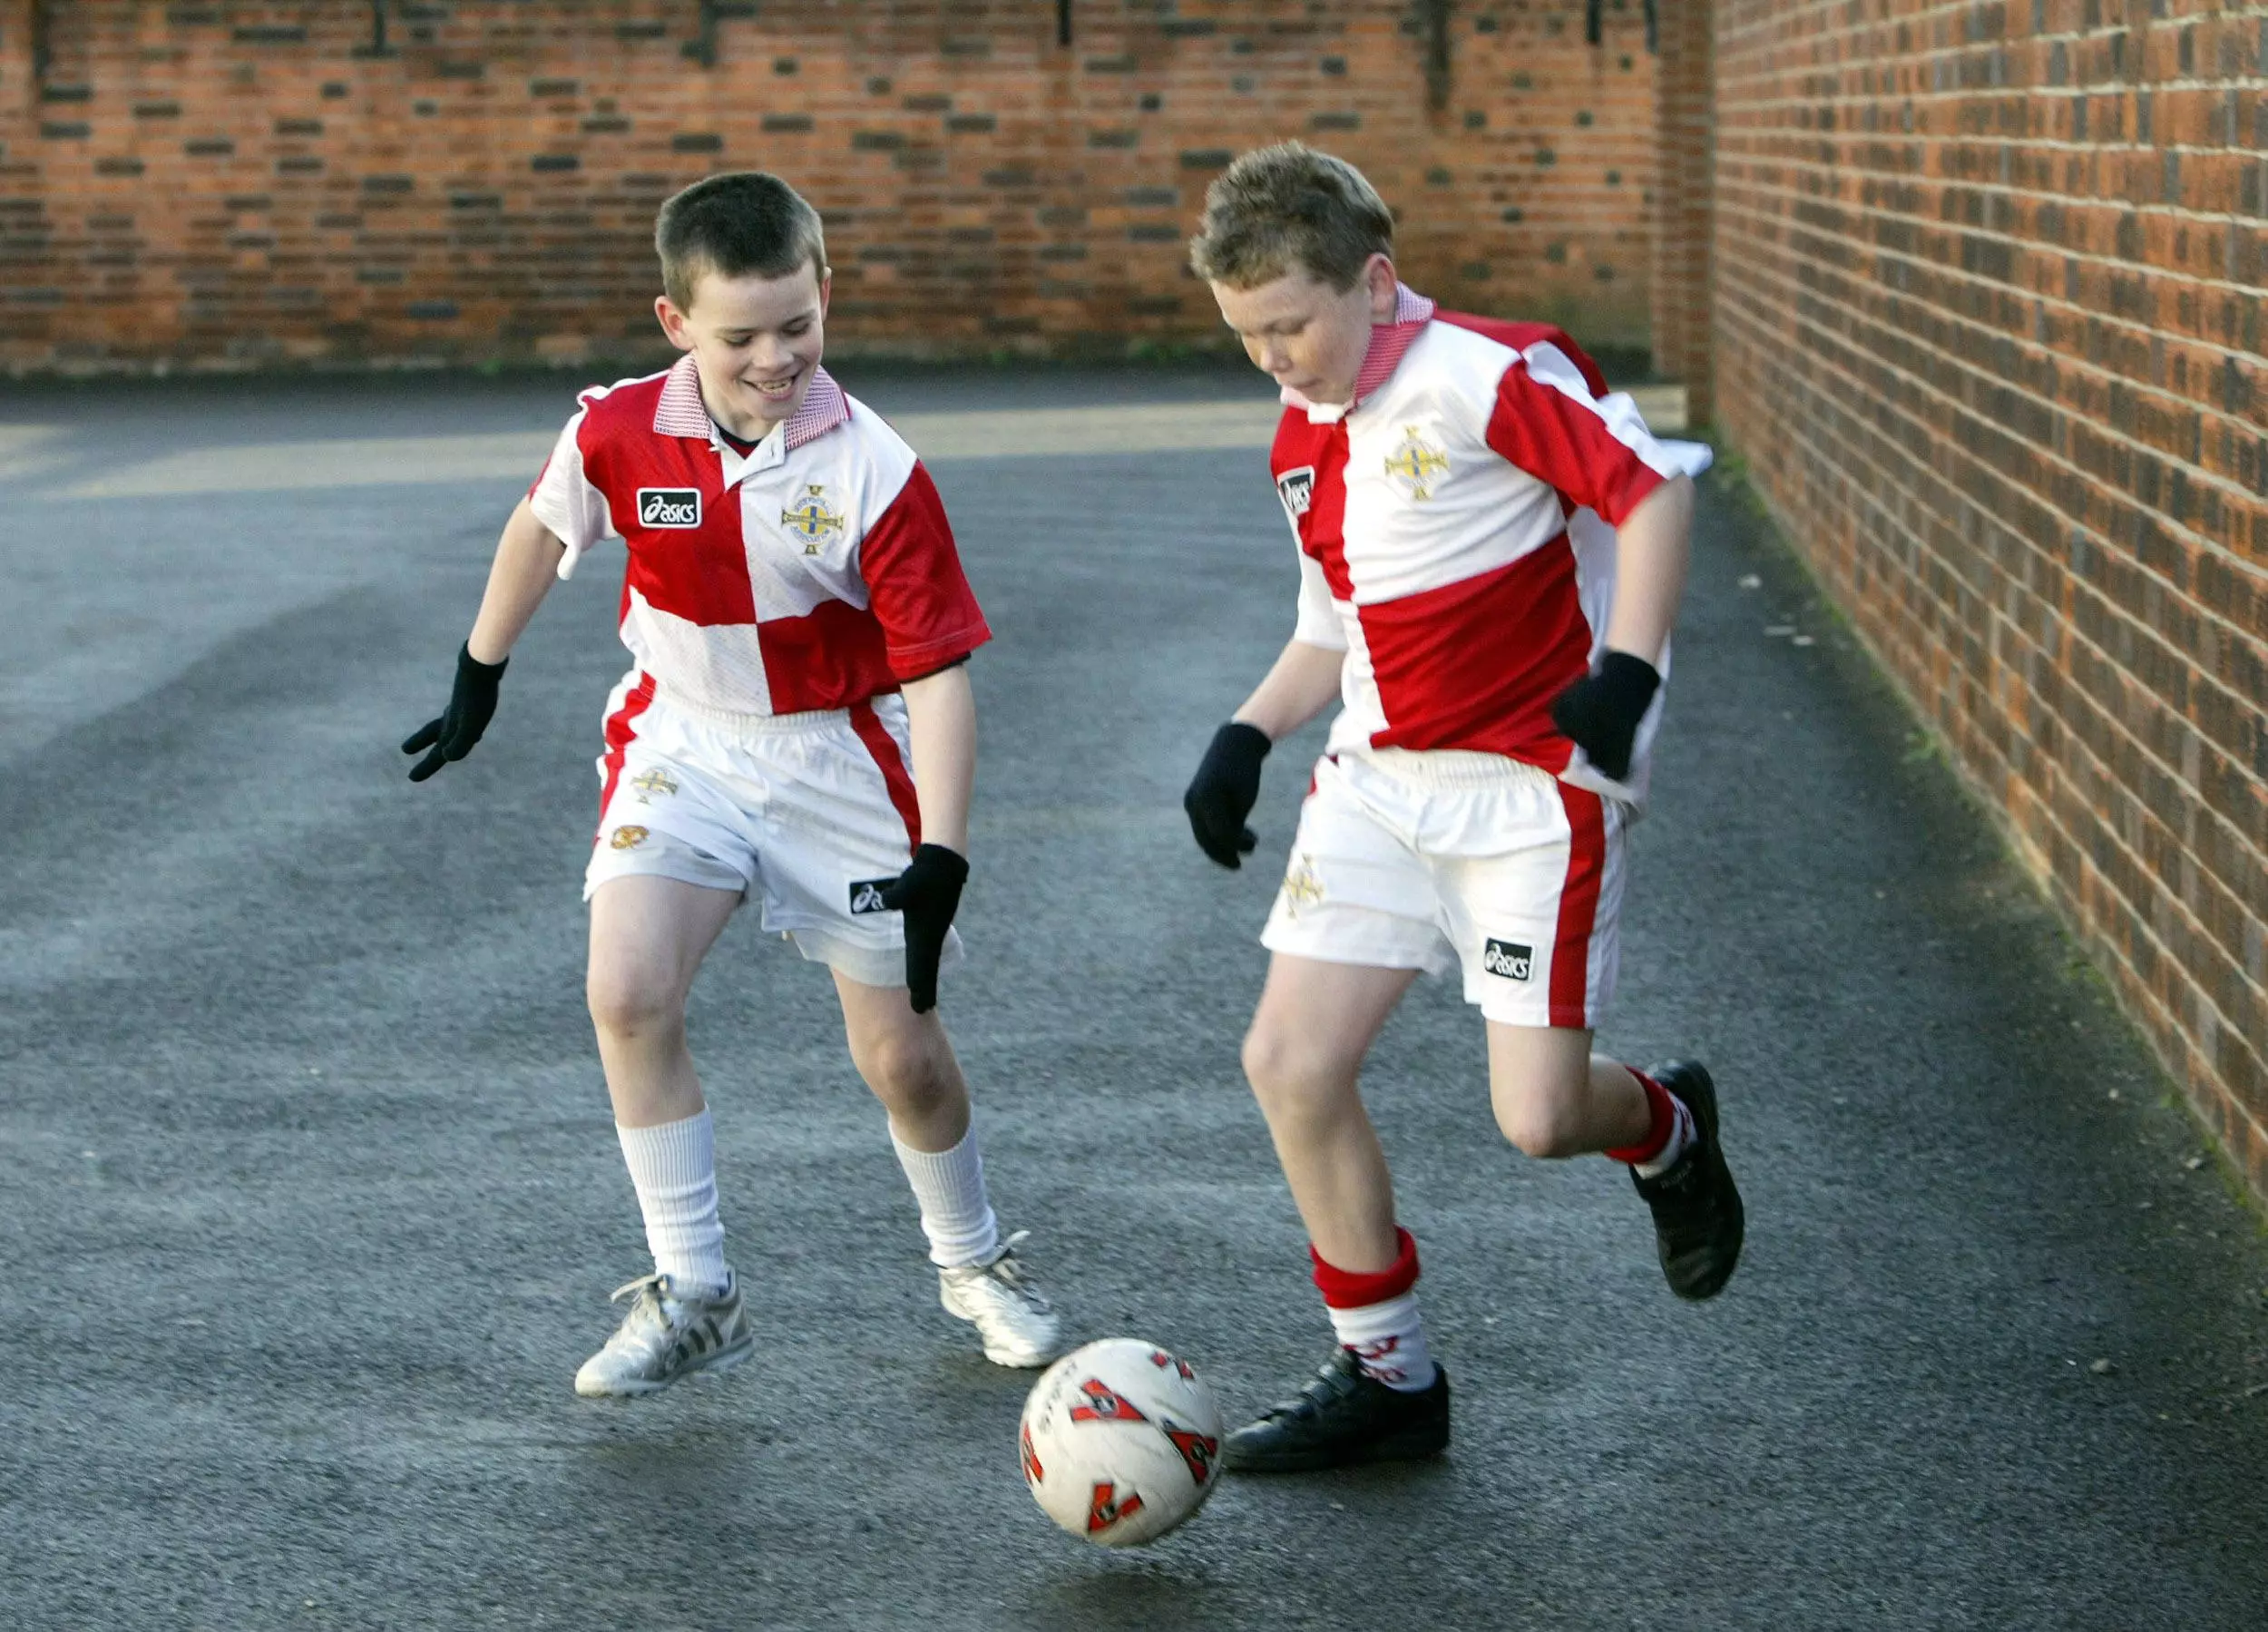 School Makes Kids Sign Contract And Bans Banter In Playground Football